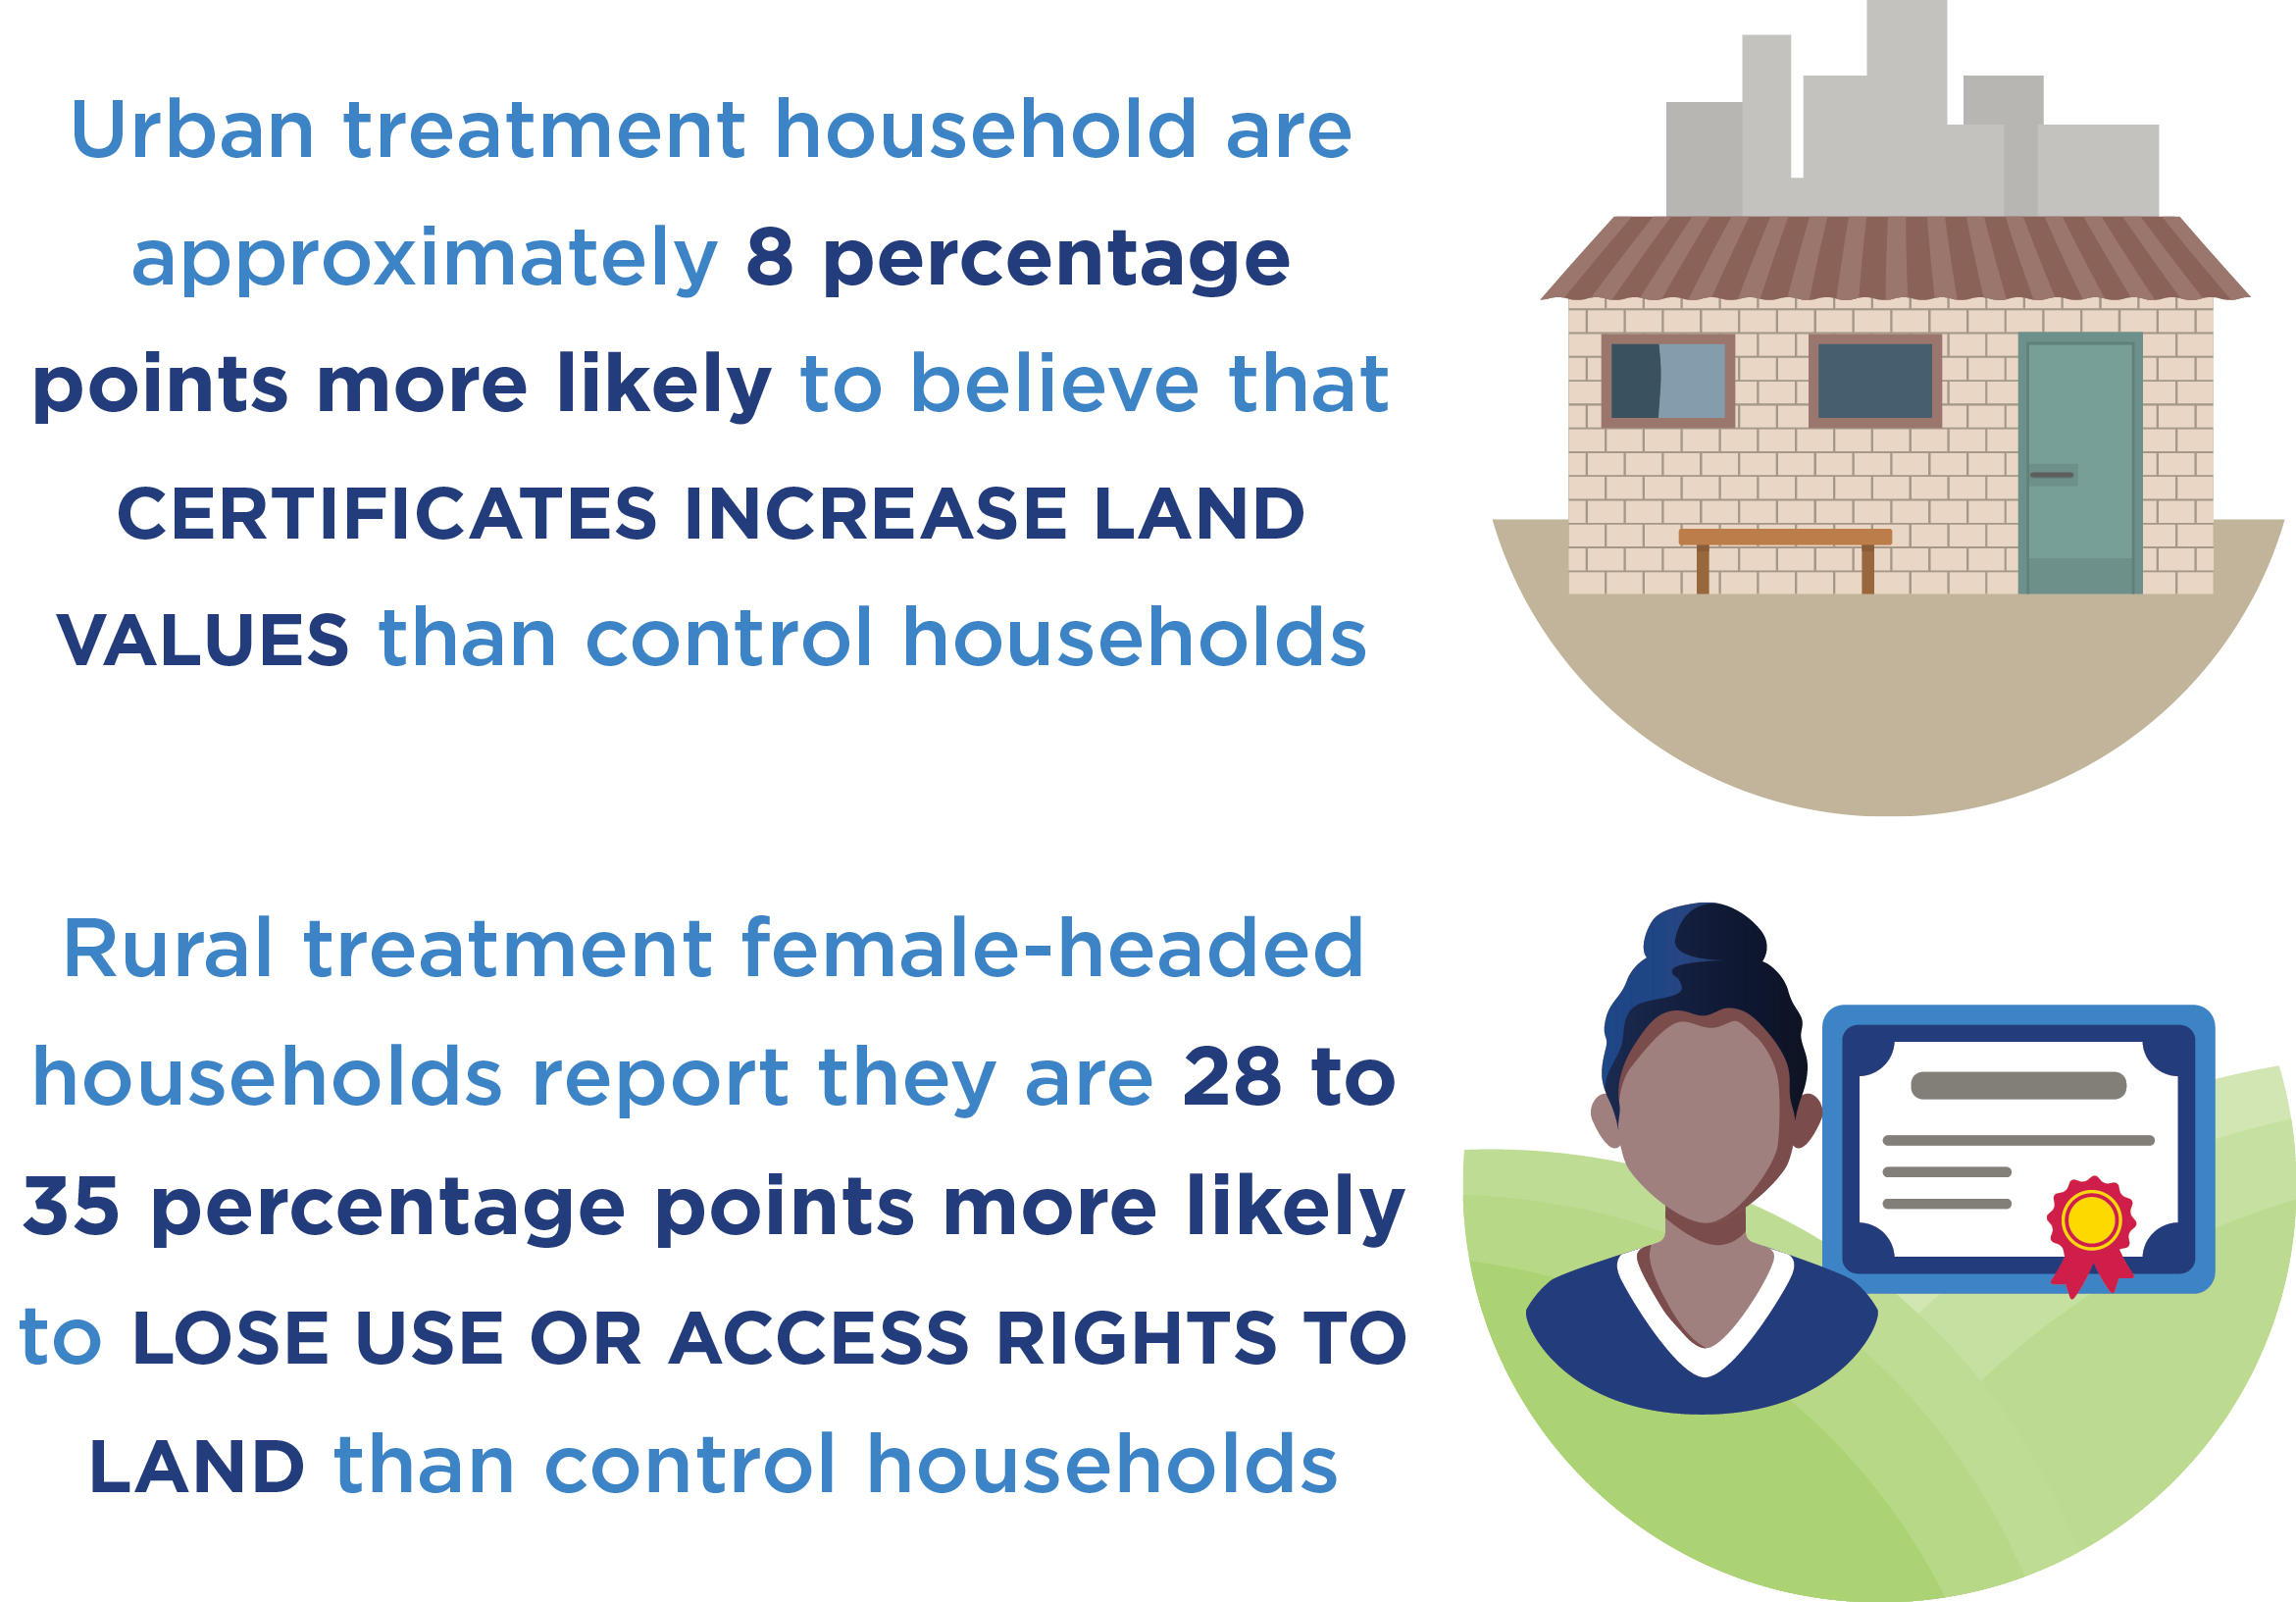 Urban treatment households are approximately 8 percentage points more likely to believe that certificates increase land values than control households. Rural treatment female-headed households report they are 28 to 35 percentage points more likely to lose use or access rights to land than control households.